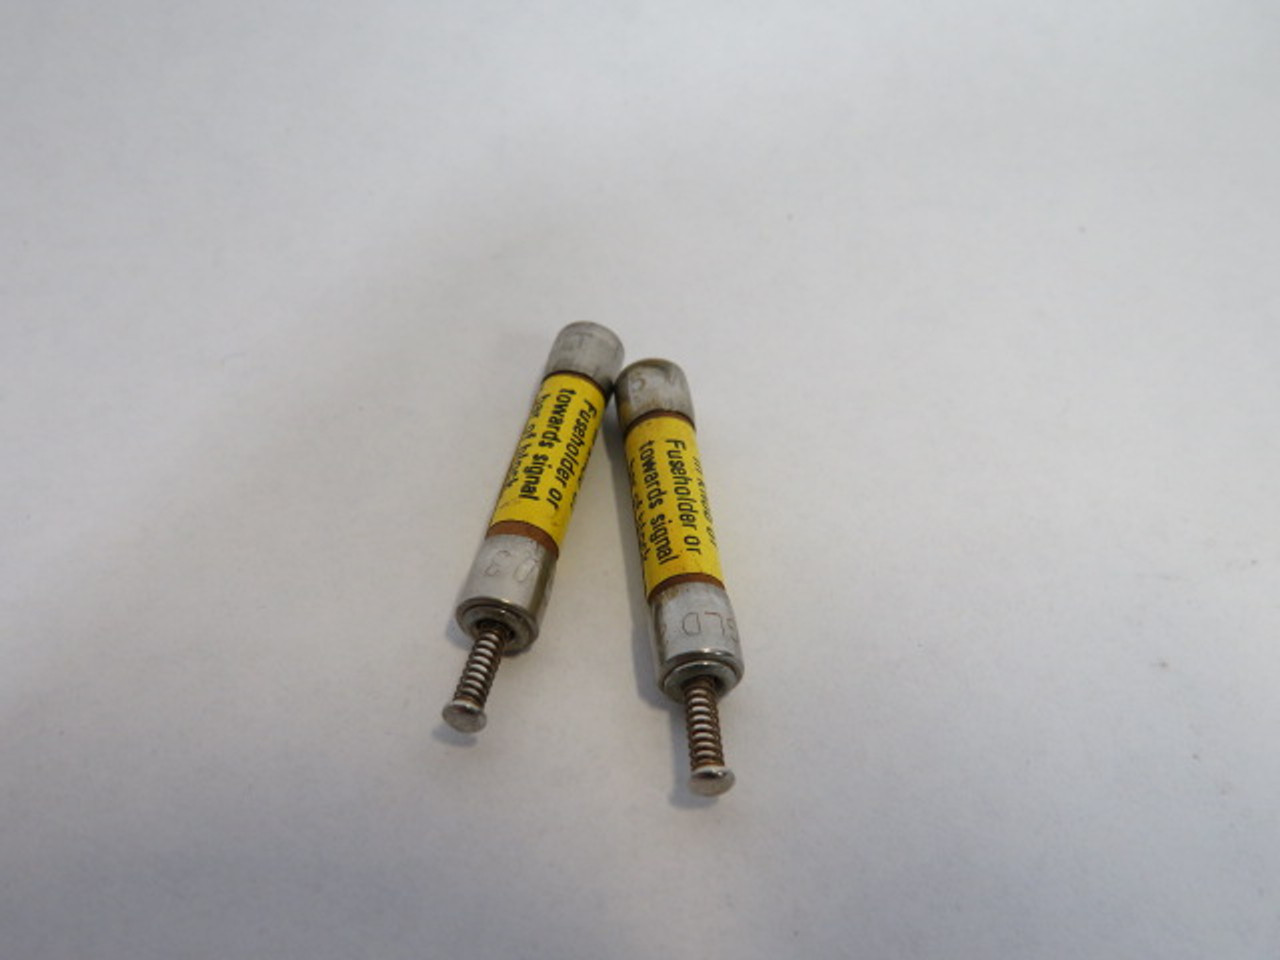 Bussmann GLD-3 Pin Indicator Fuse 3A 125V Lot of 2 USED